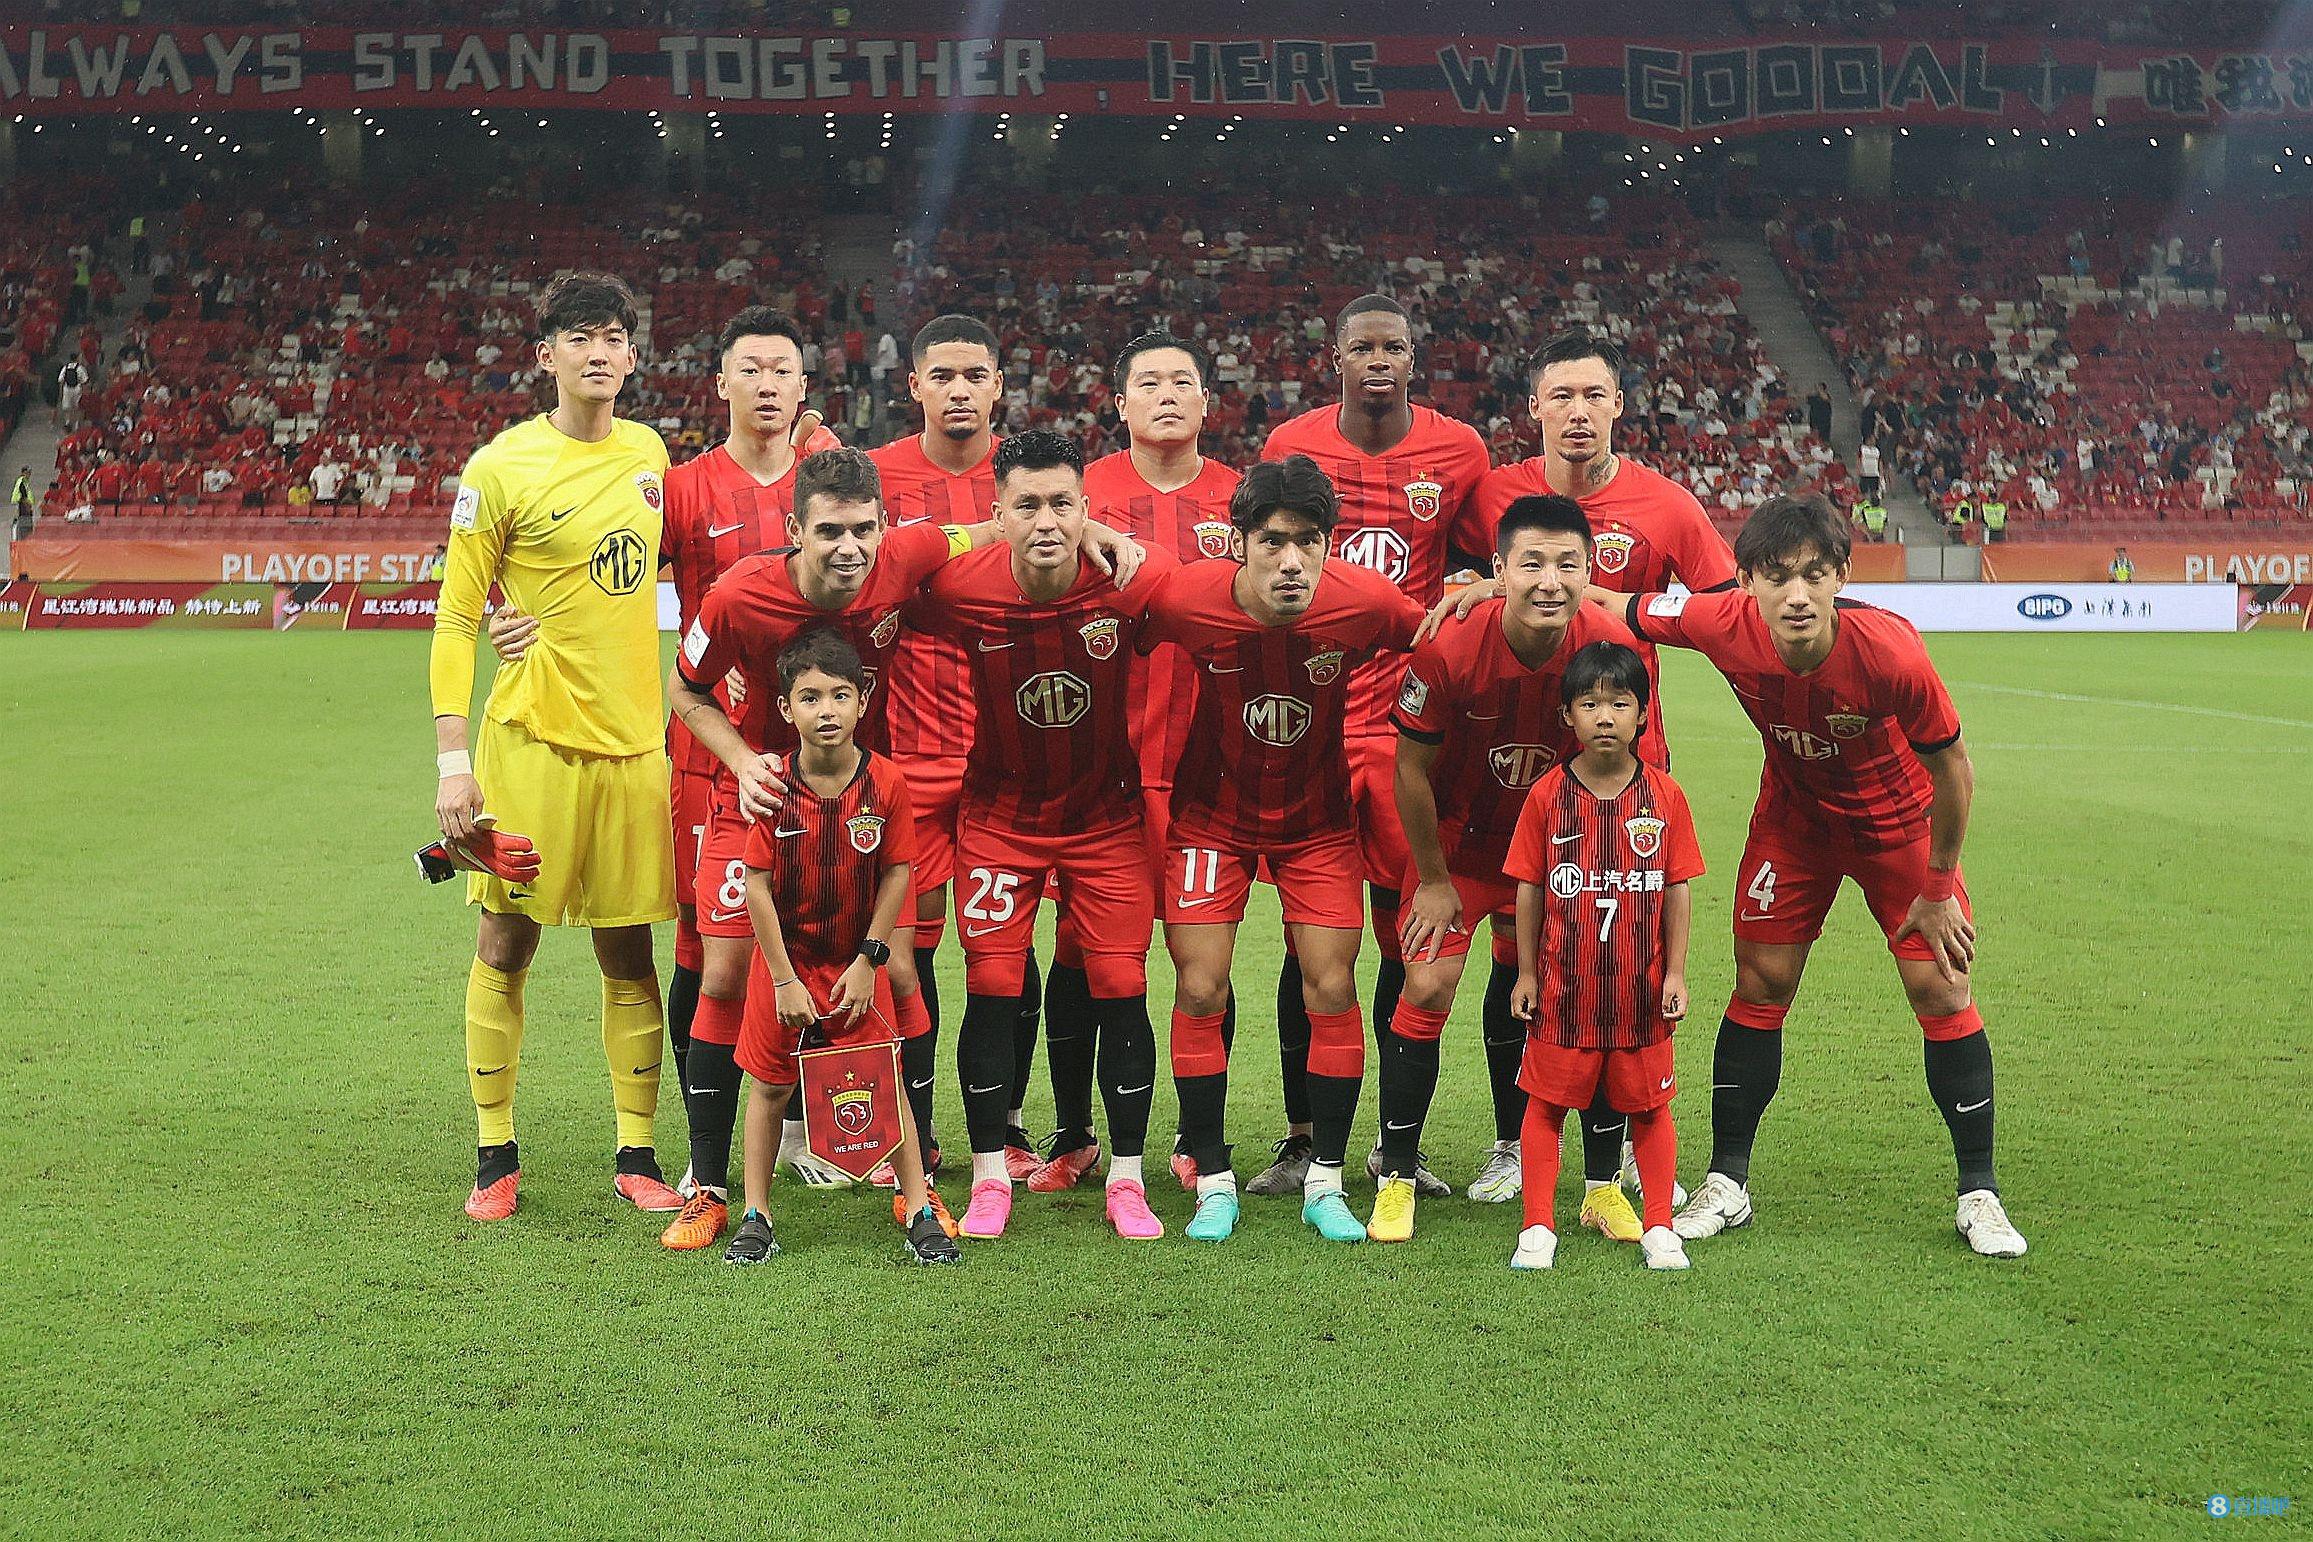 Blogger: The harbor team has arrived in Zhengzhou and stepped on the ground before the game at 19:30.